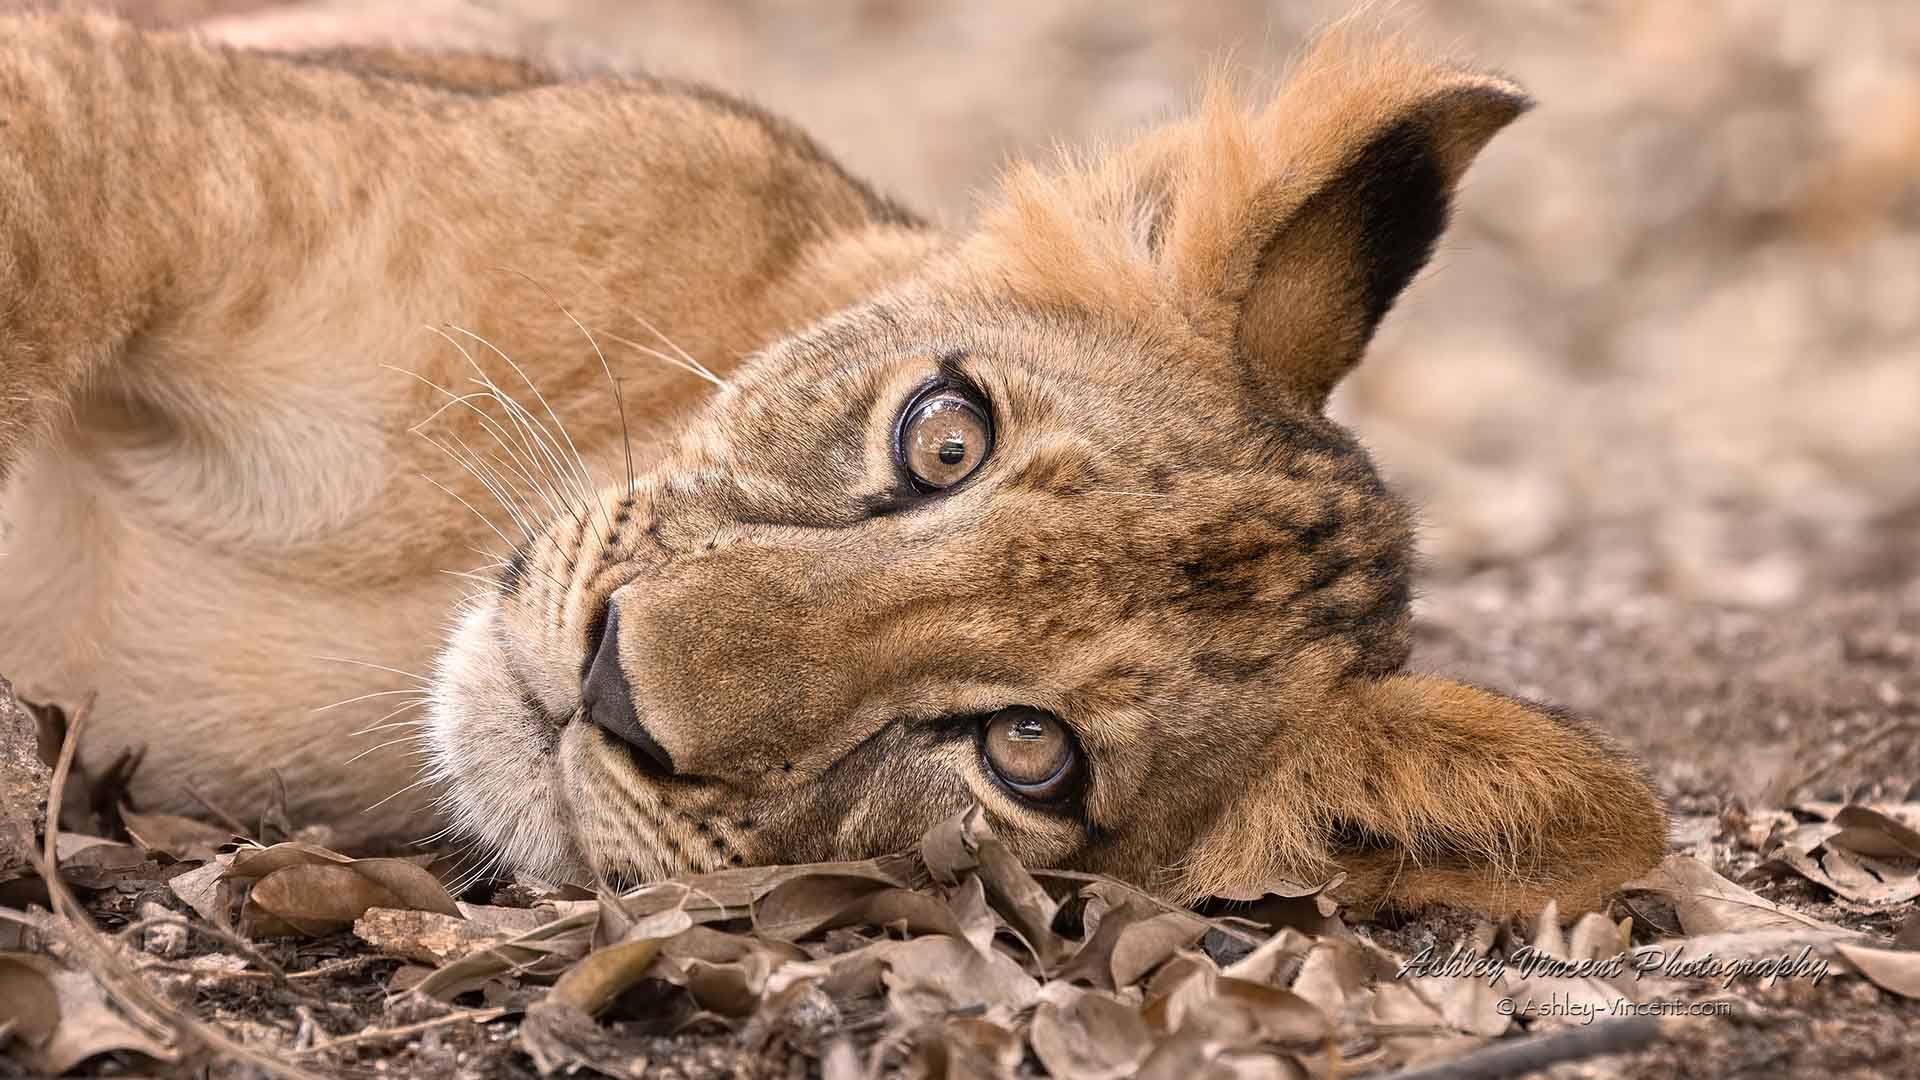 lion cub lying down with an ear to the ground by photographer ashley vincent